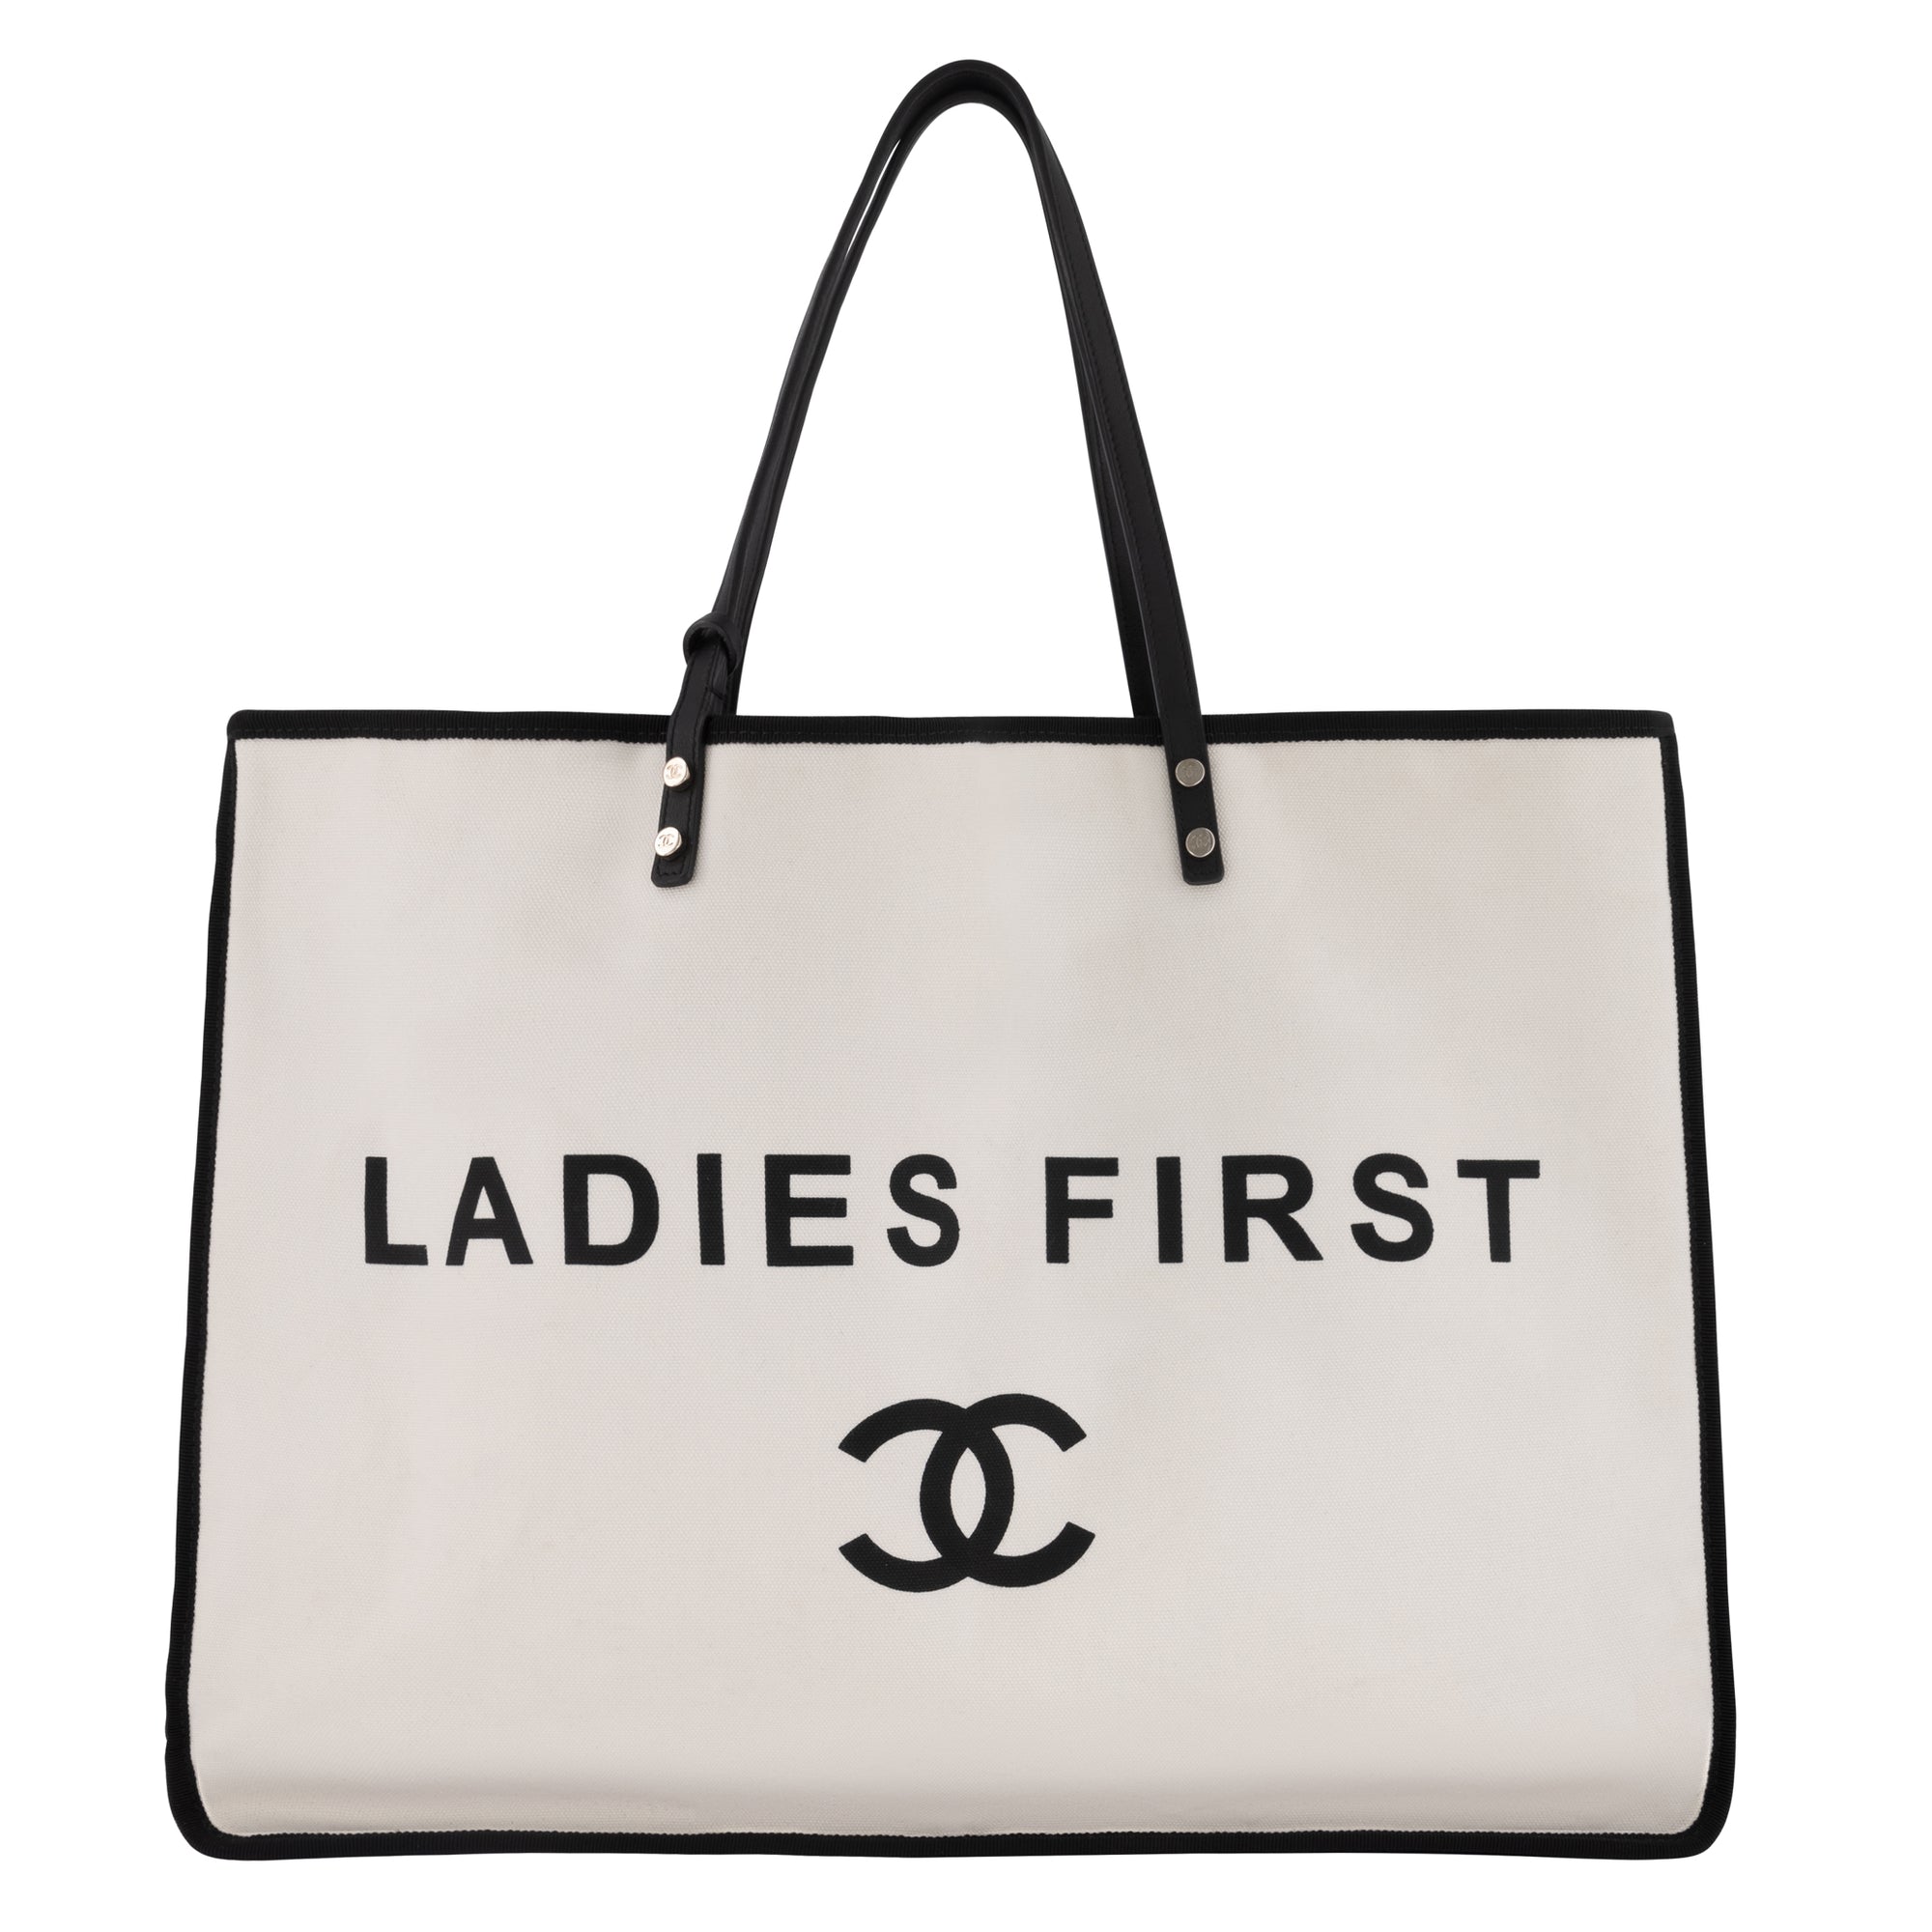 Chanel Large Ladies First Shopping Tote - Dream Closet by Sira Pevida